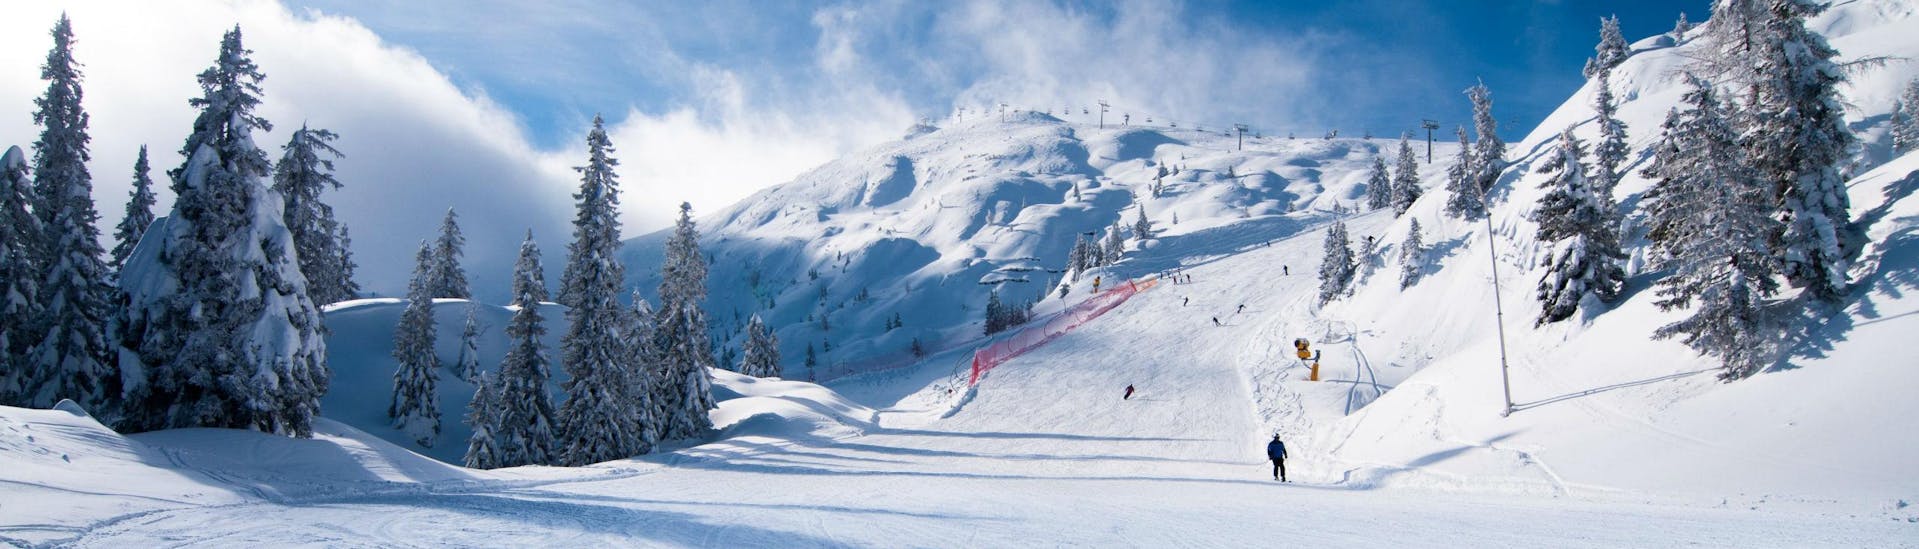 A couple of skiers can be seen skiing down a freshly groomed ski slope in the Italian ski resort of Andalo, where local ski schools offer a variety of ski lessons.